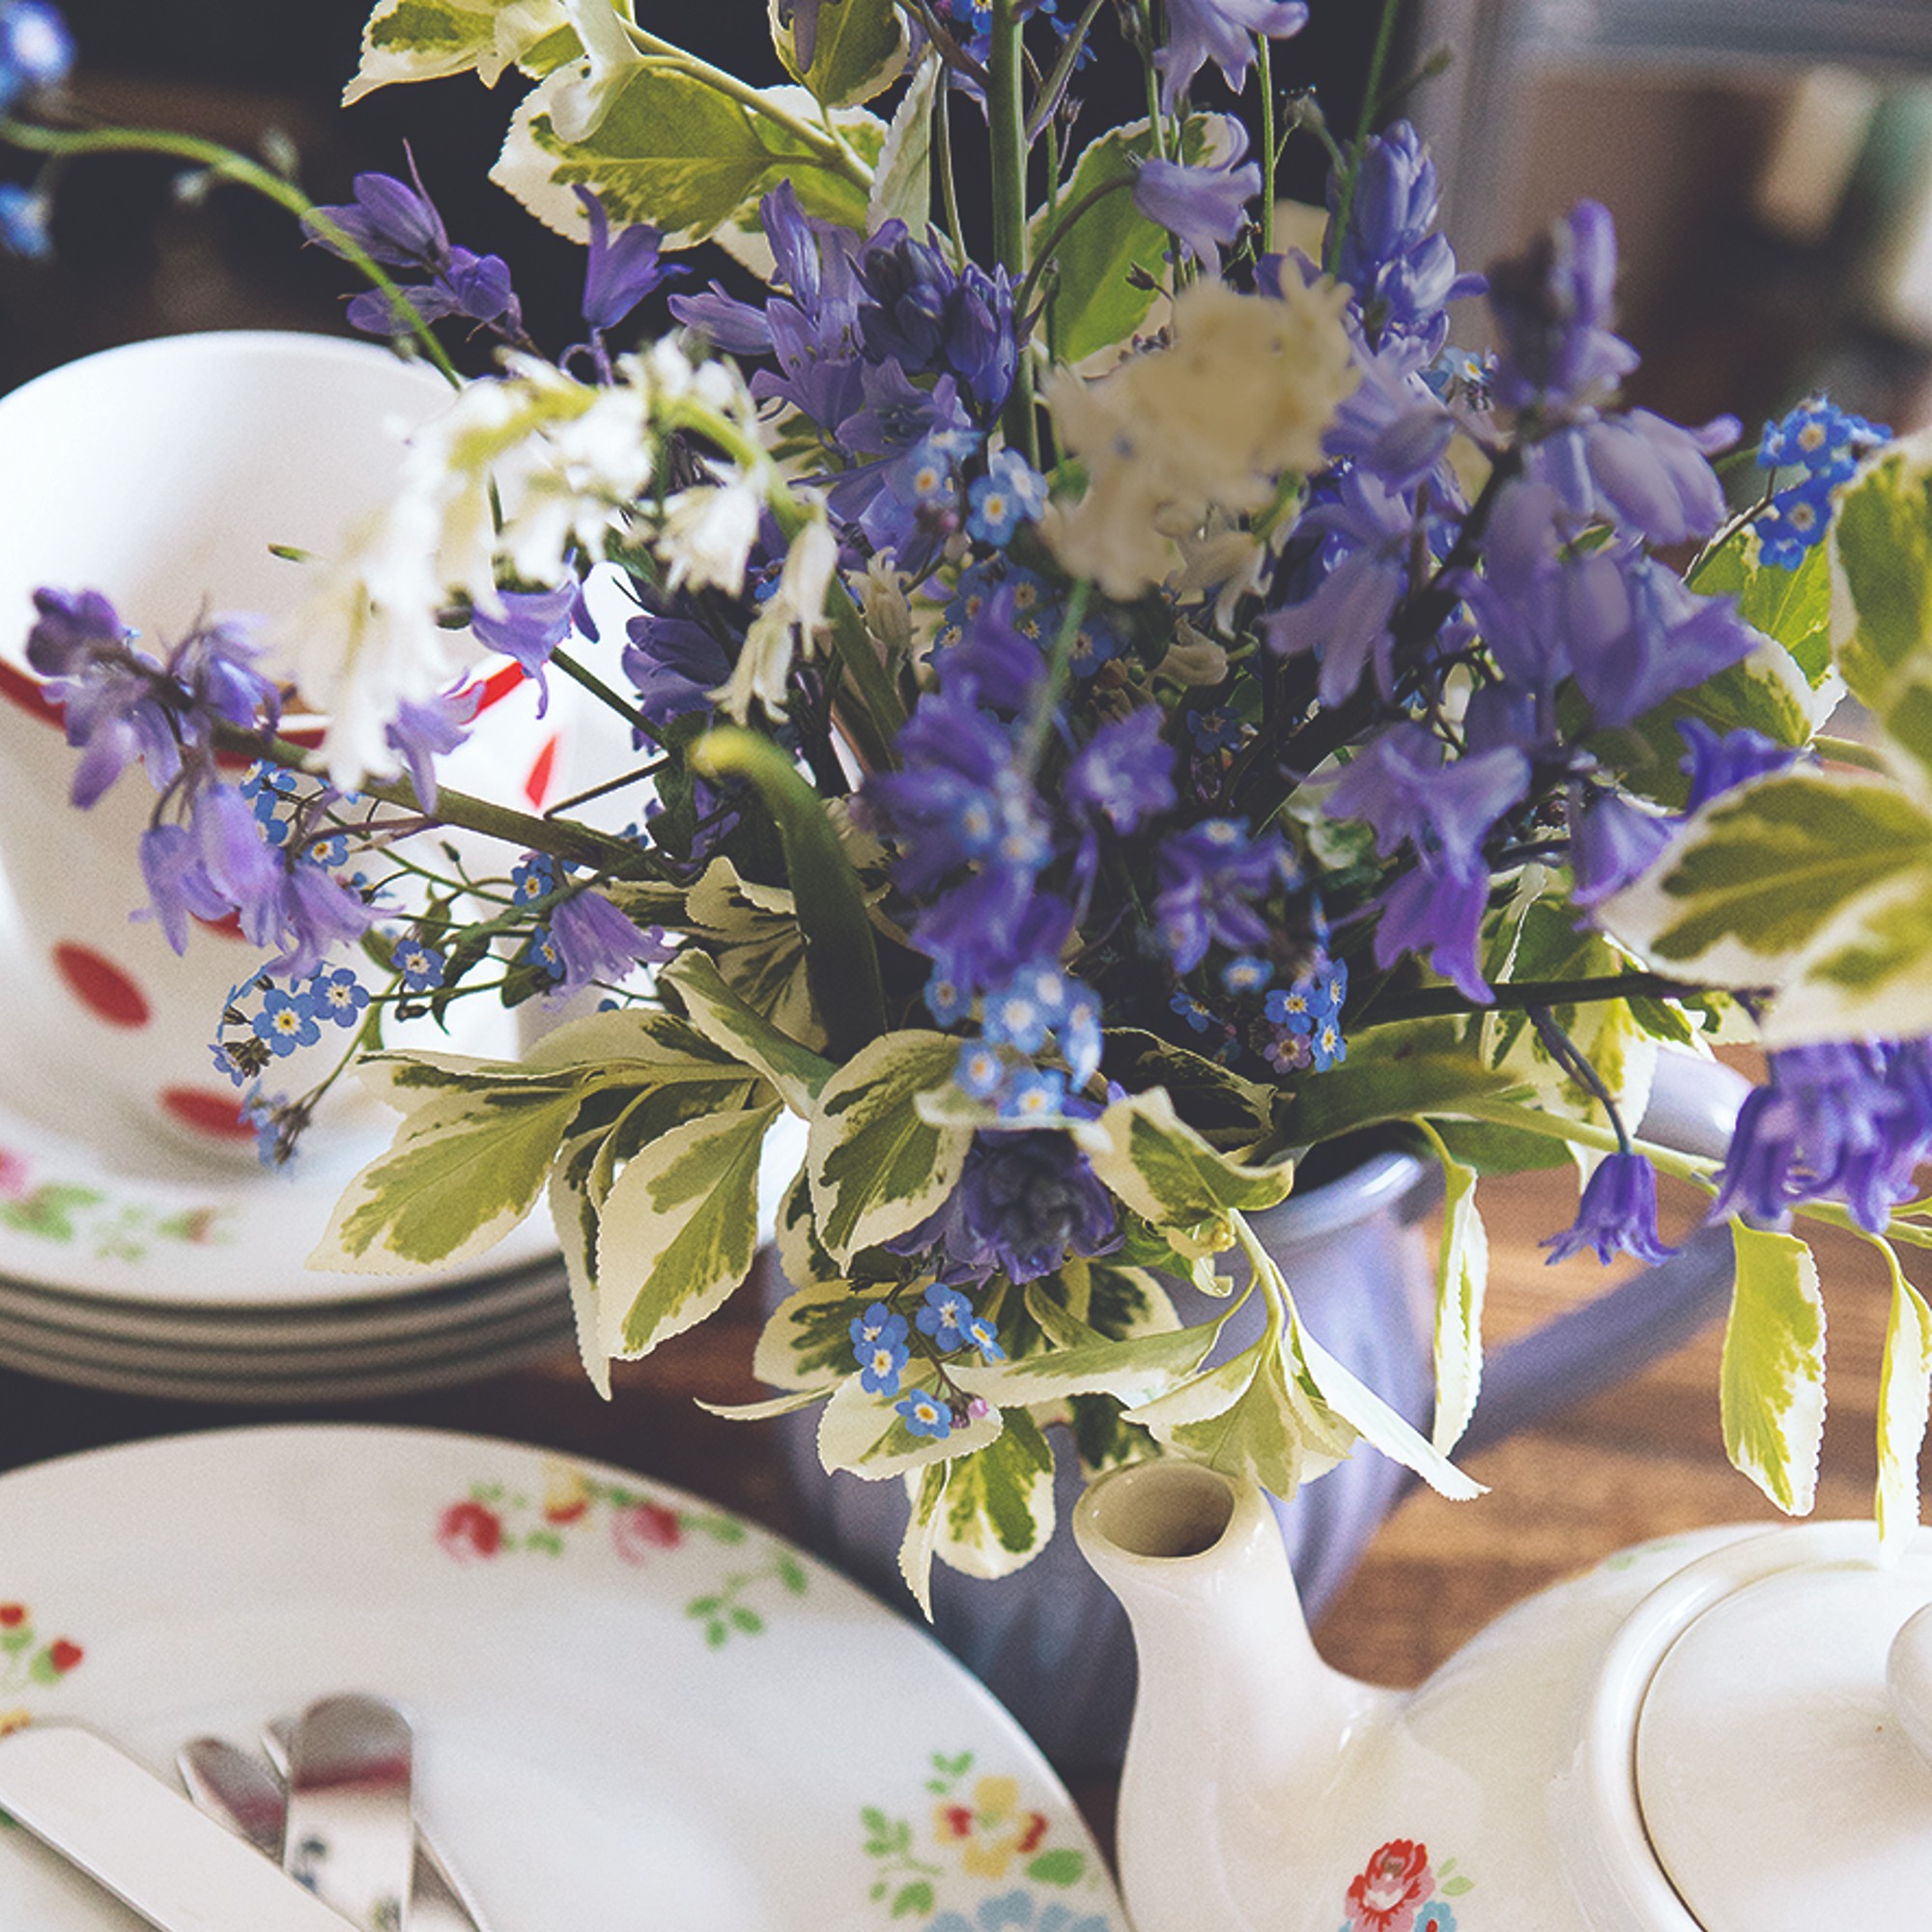 A vase of bluebells with a stack of plates, teacups and a teapot